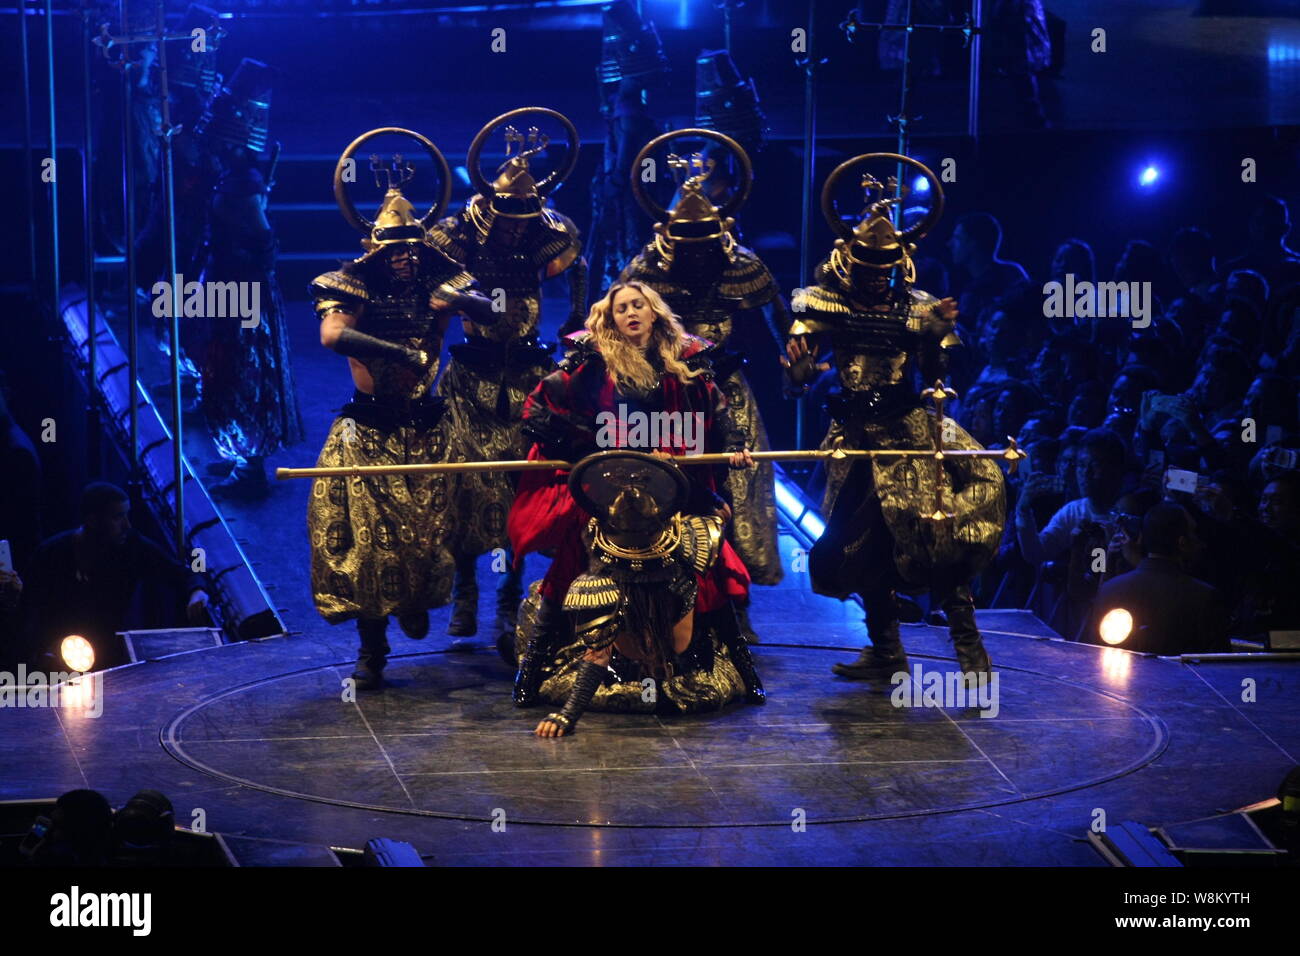 American singer Madonna performs at a concert during The Rebel Heart World Tour in Macau, China, 20 February 2016. Stock Photo